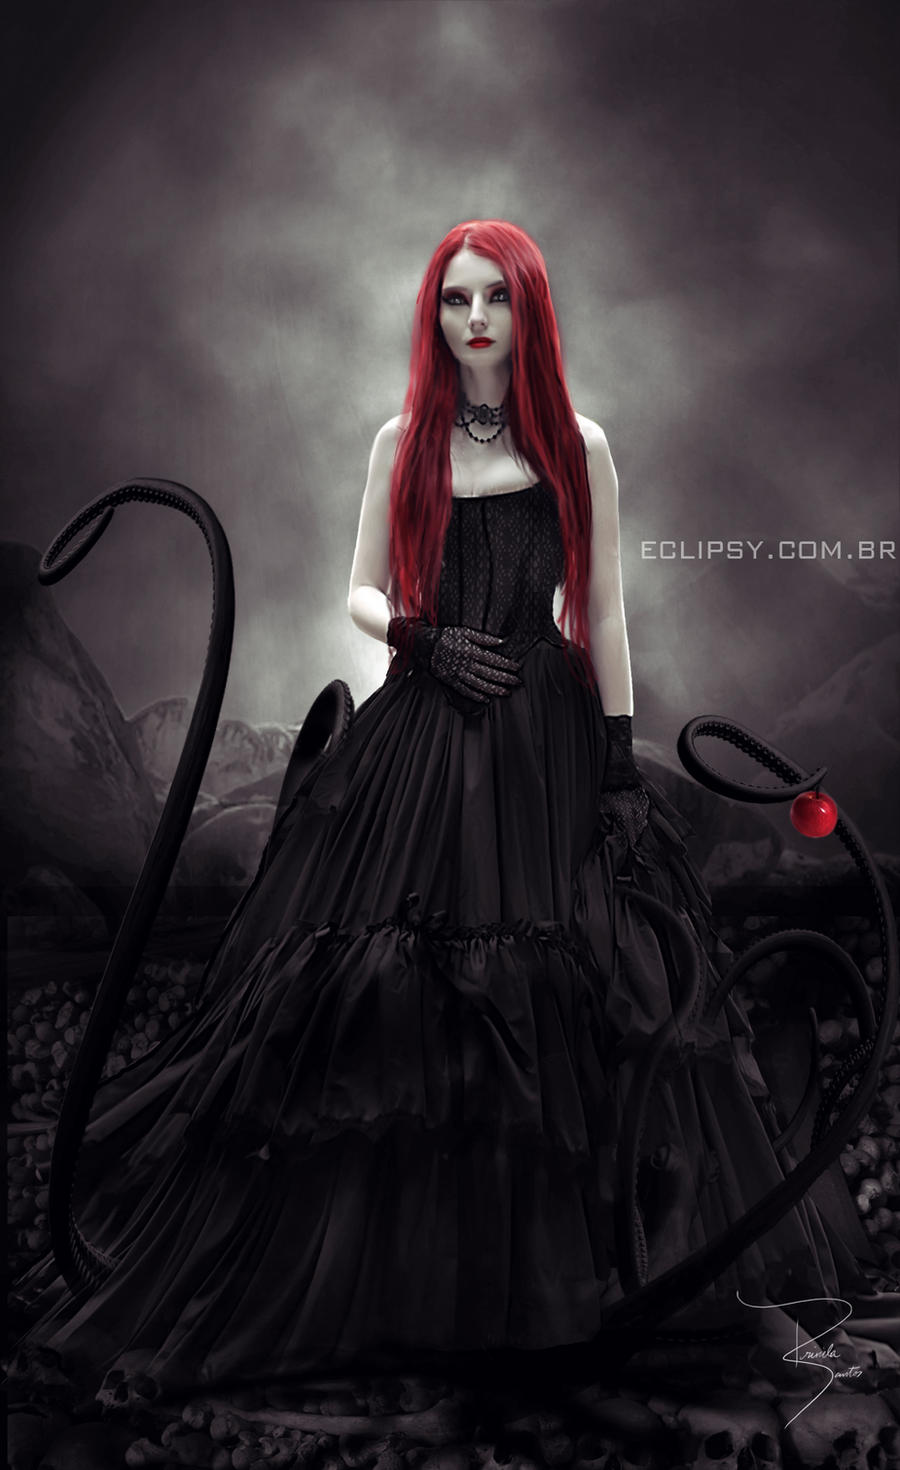 Lilith - The face of the Sin by eclipsy on DeviantArt